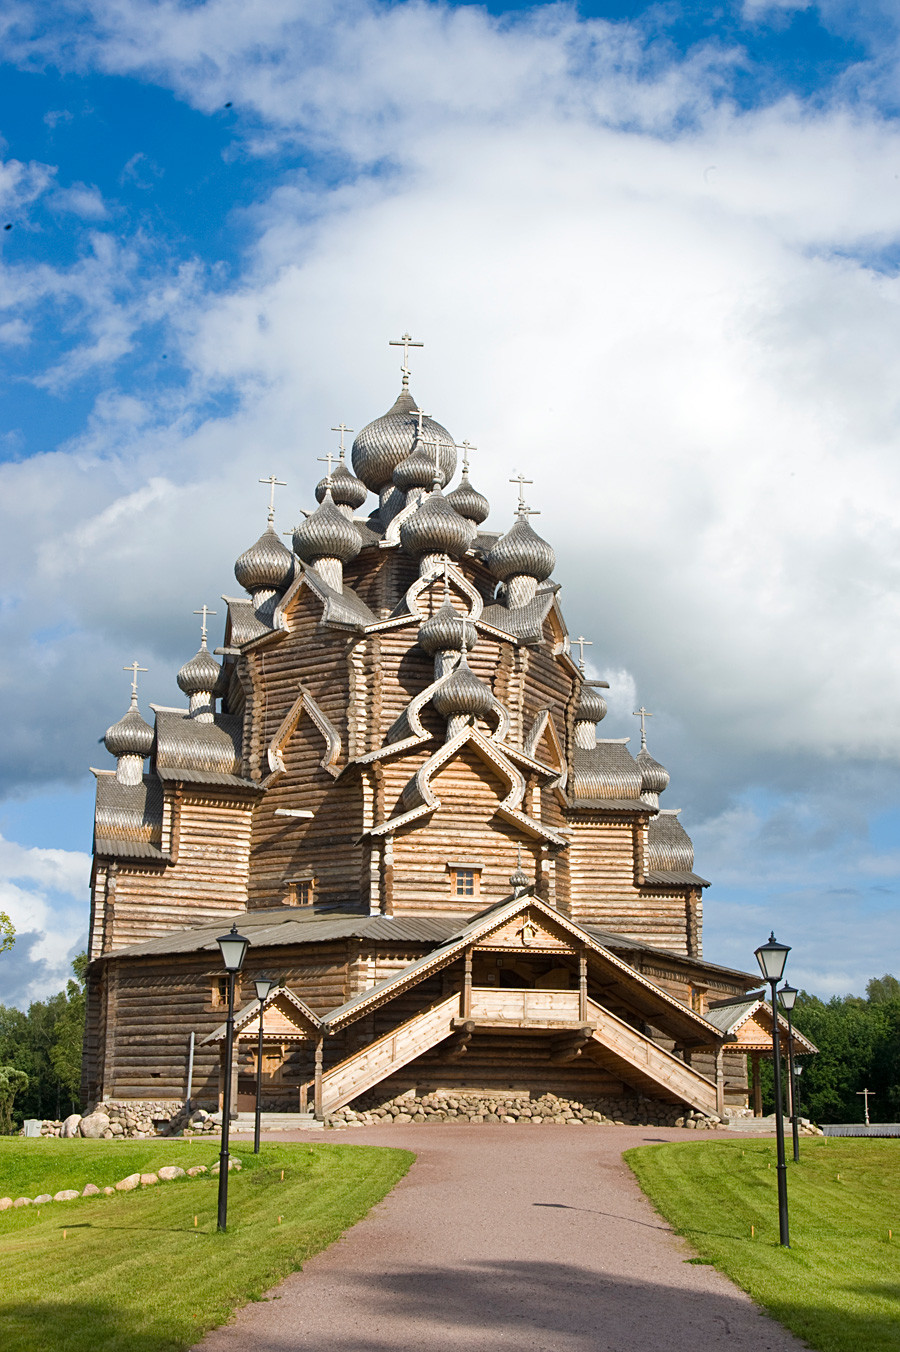 Bogoslovka. Church of the Intercession, west view. August 17, 2009.